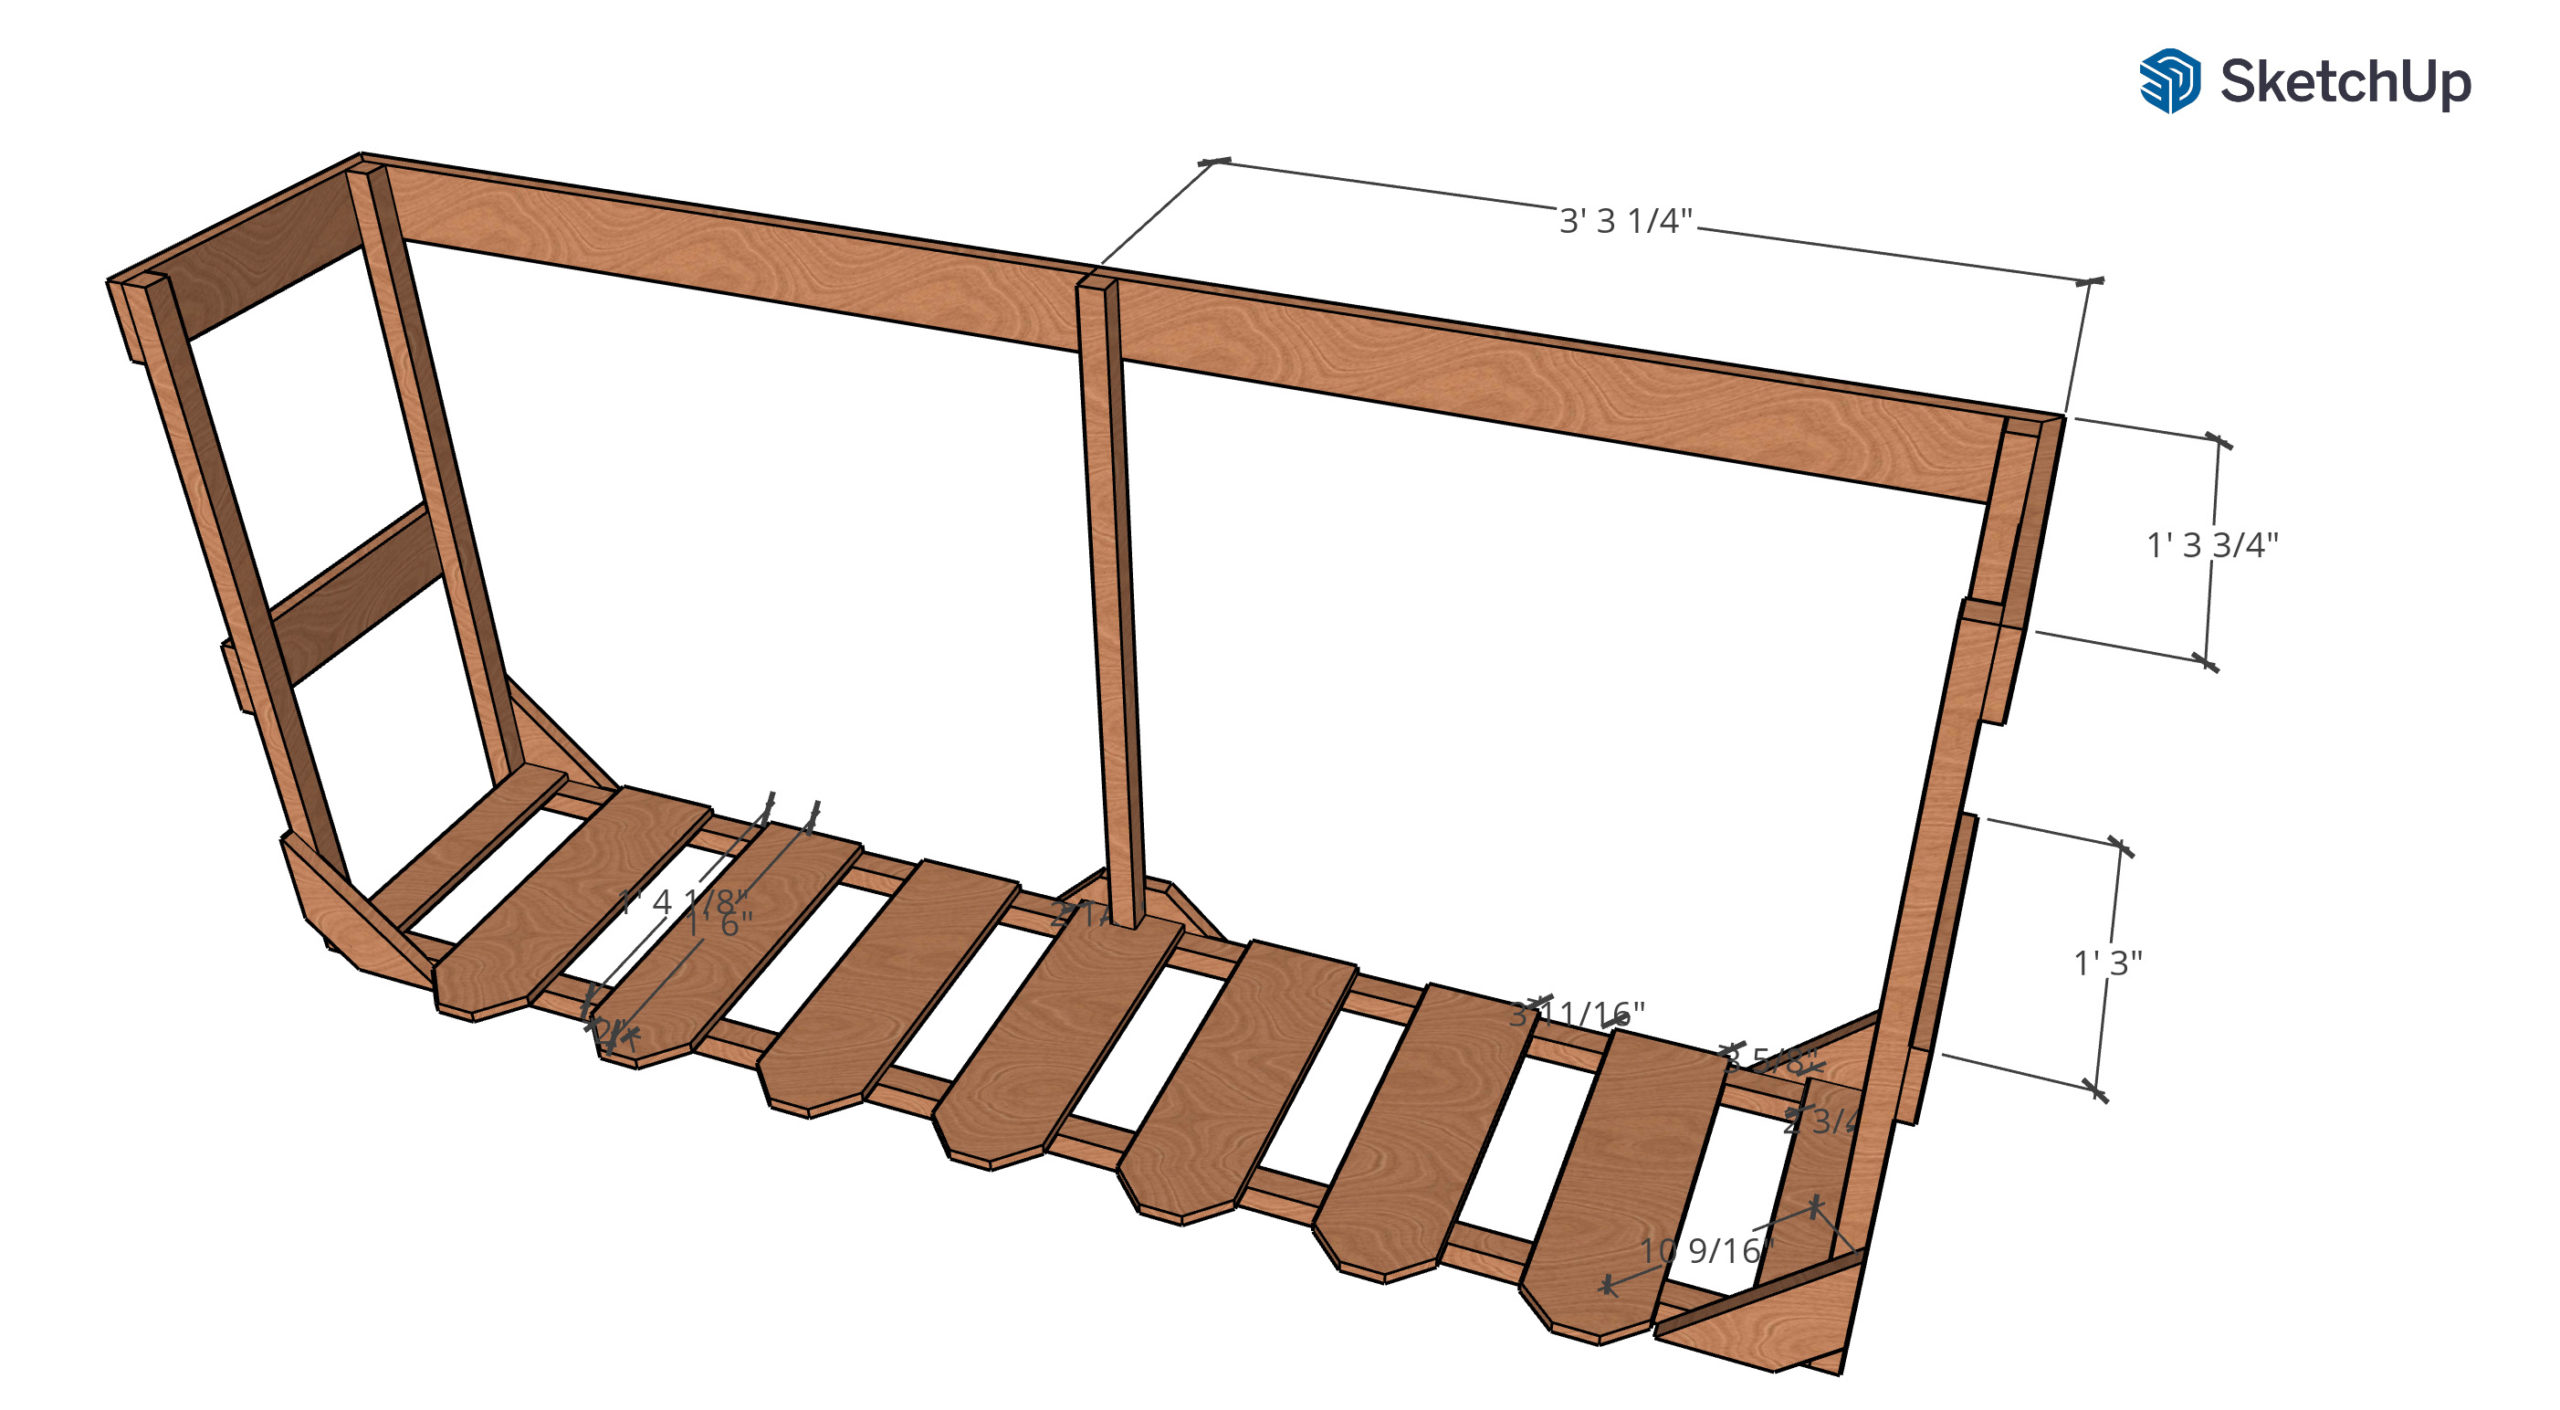 A 3D model of a firewood rack, with wood-textured pieces and dimensions.